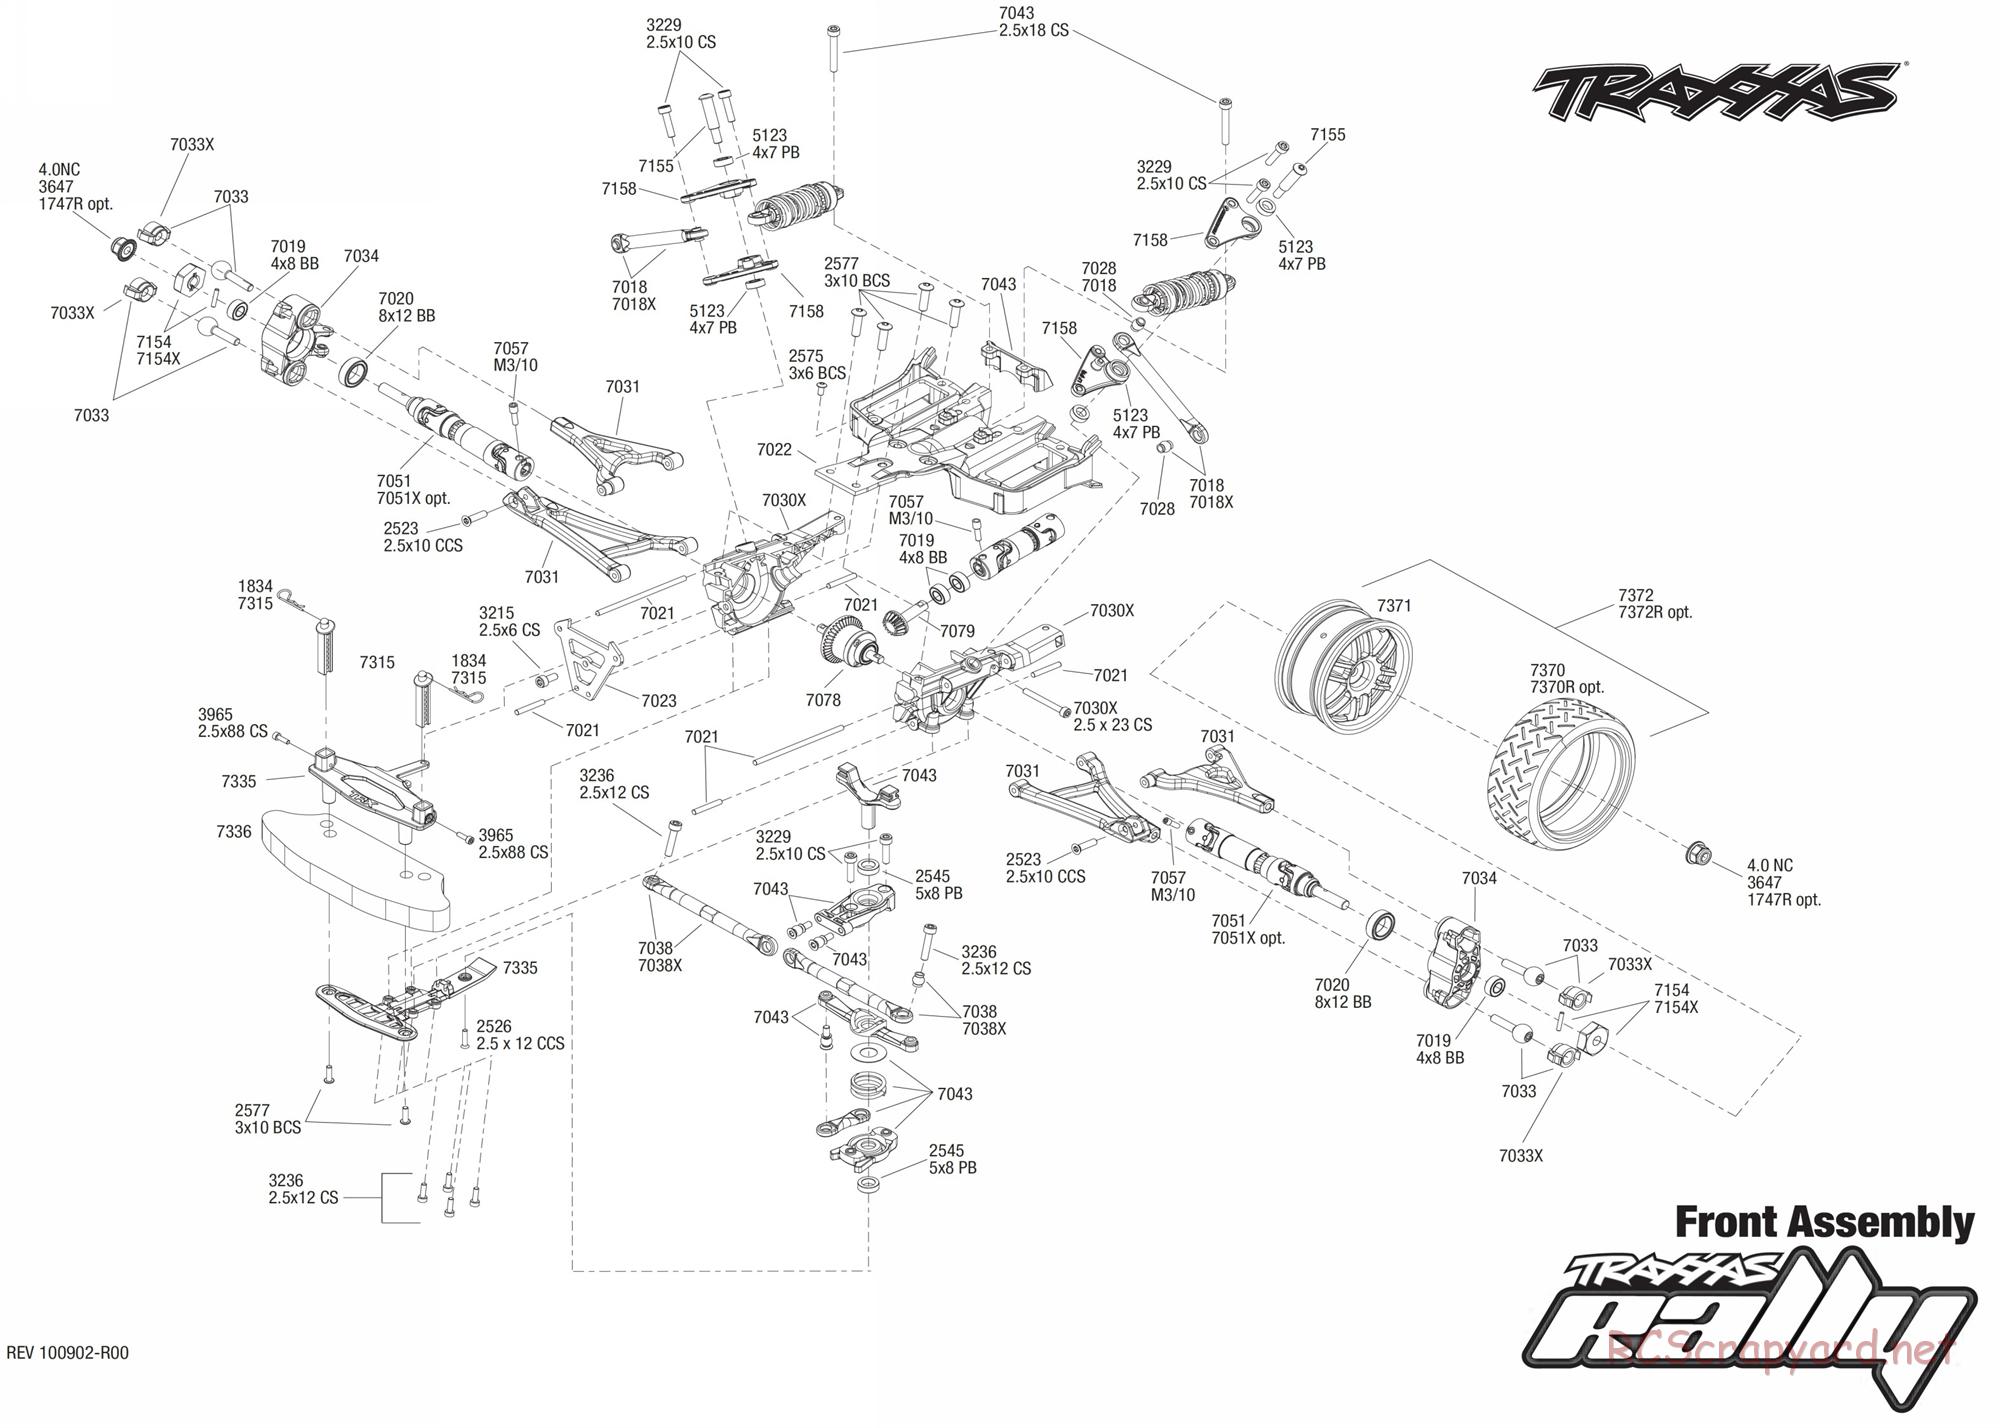 Traxxas - 1/16 Rally VXL (2010) - Exploded Views - Page 3